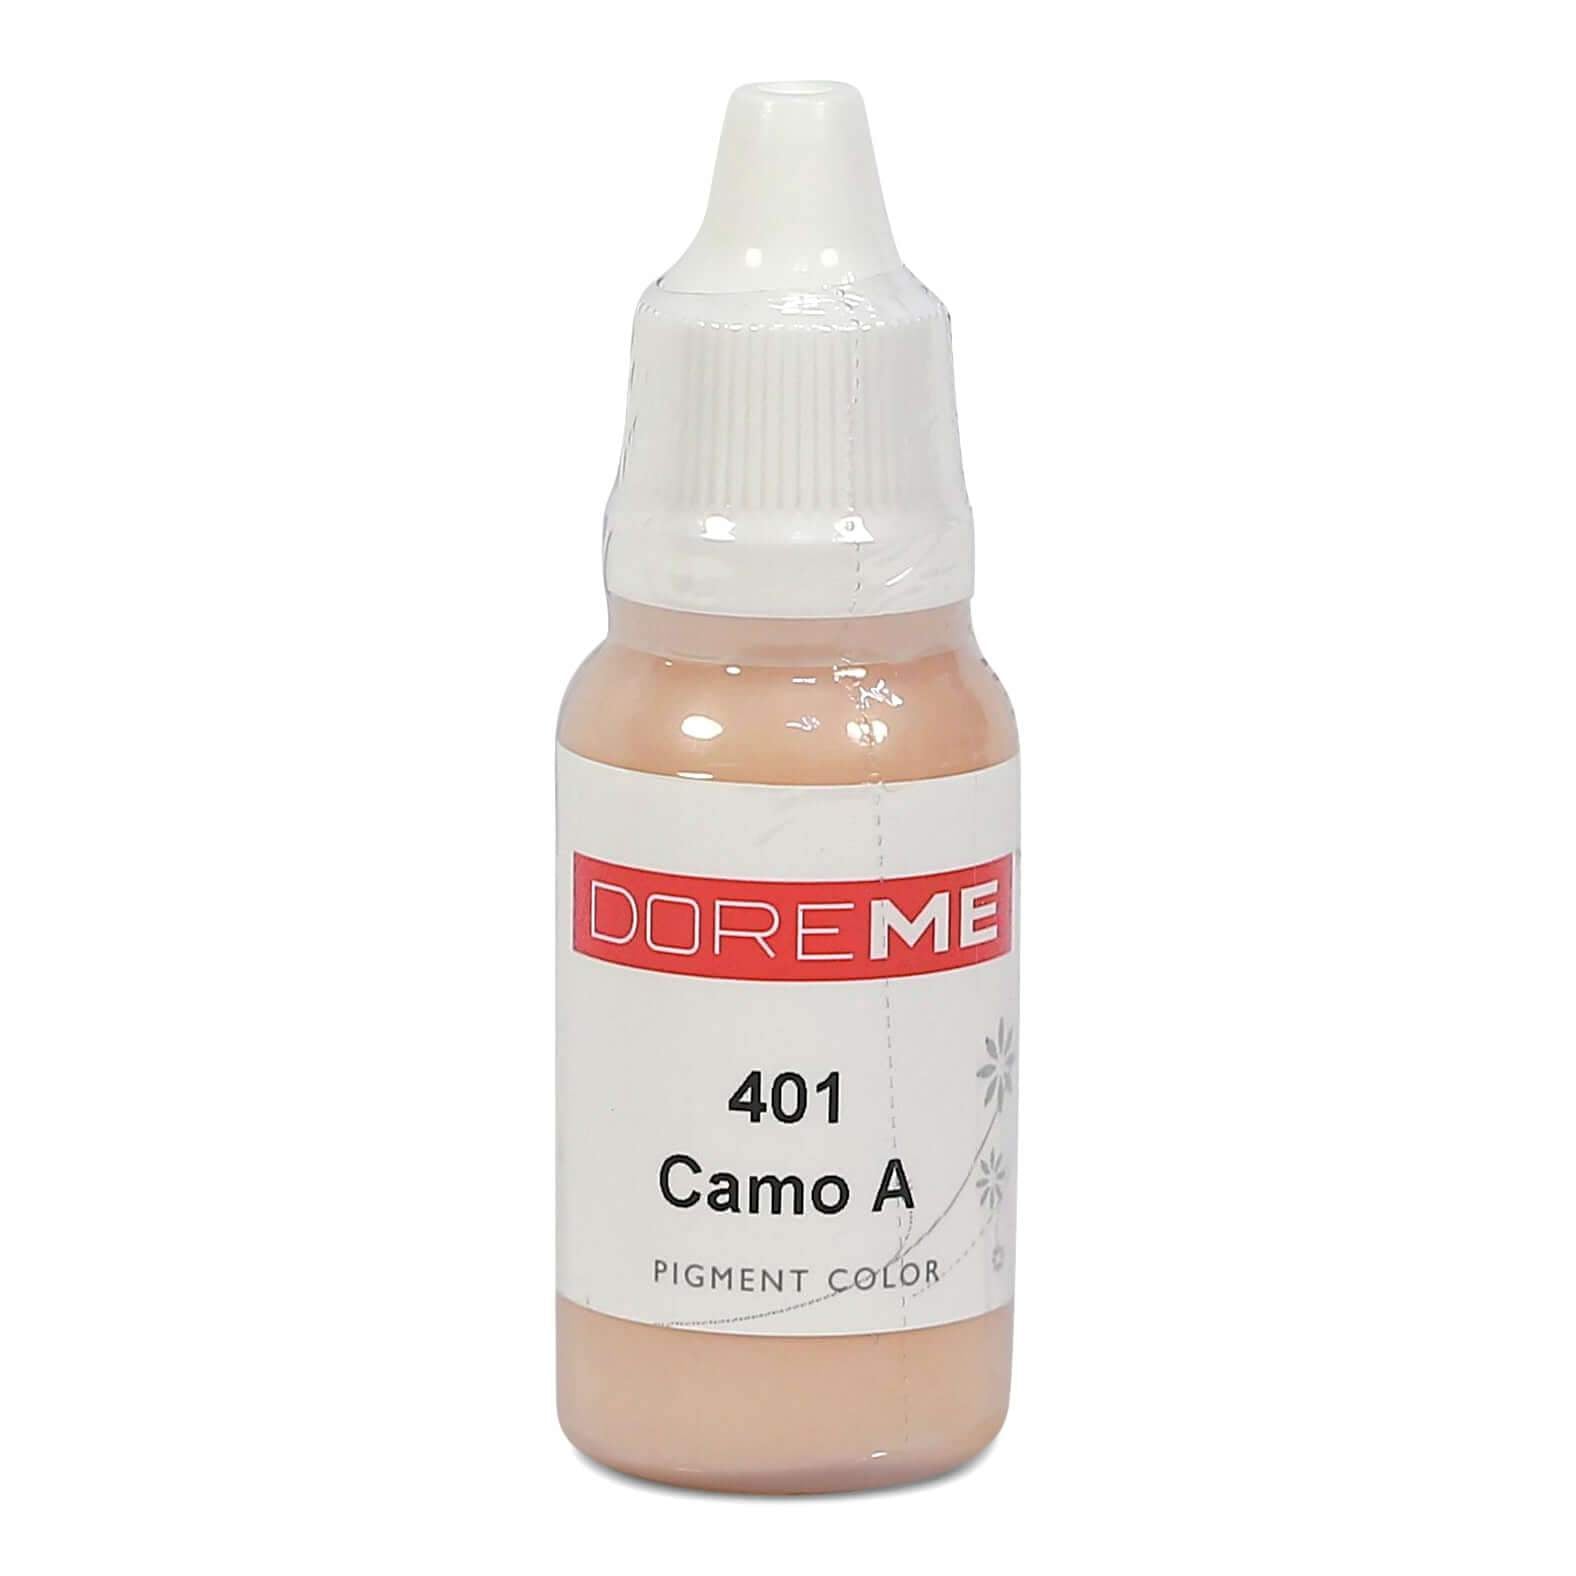 Doreme Skin Camouflage Pigments 401 Camo A (c) - Beautiful Ink UK trade and wholesale supplier